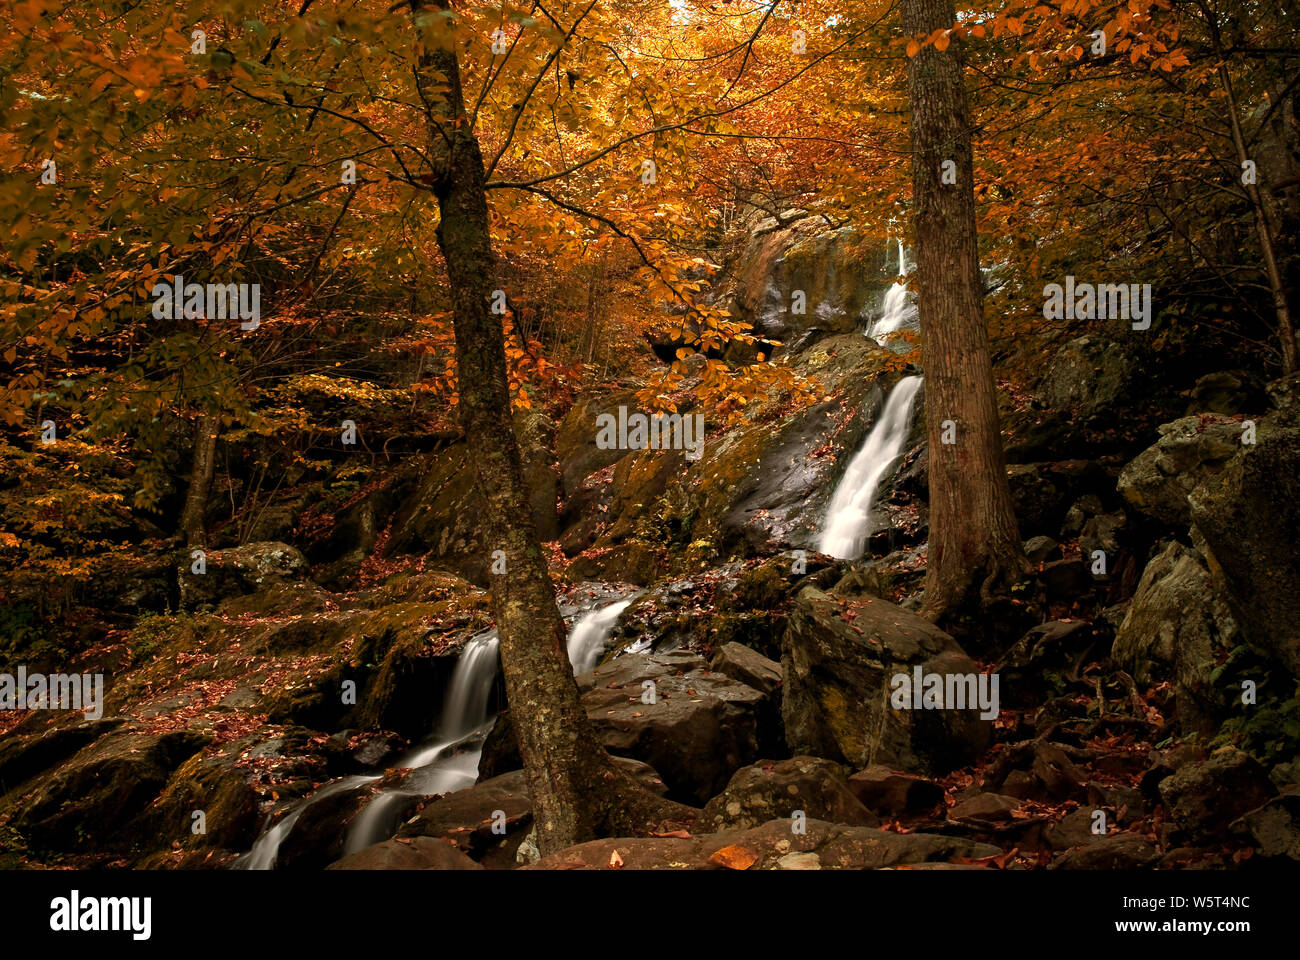 A autumn scene of a waterfall Stock Photo